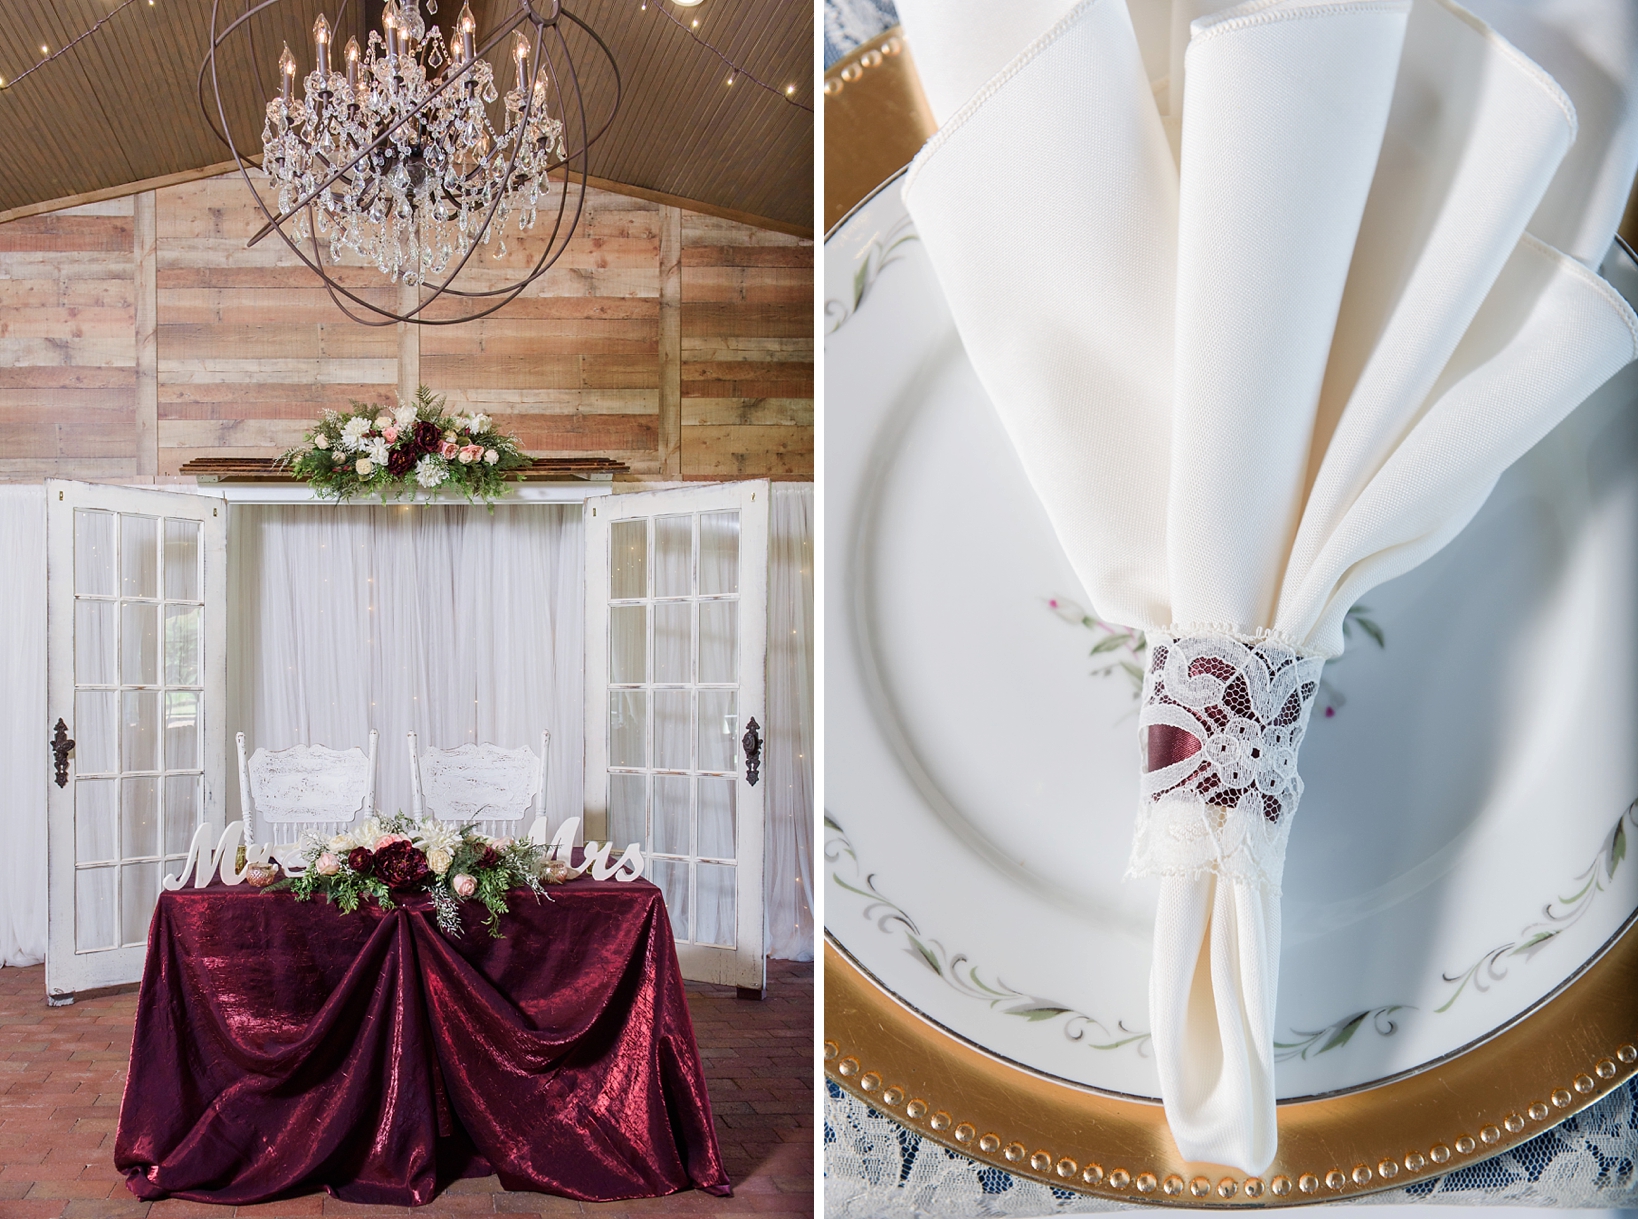 Sweetheart table with rustic accents including lace napkin holders and floral pops of color